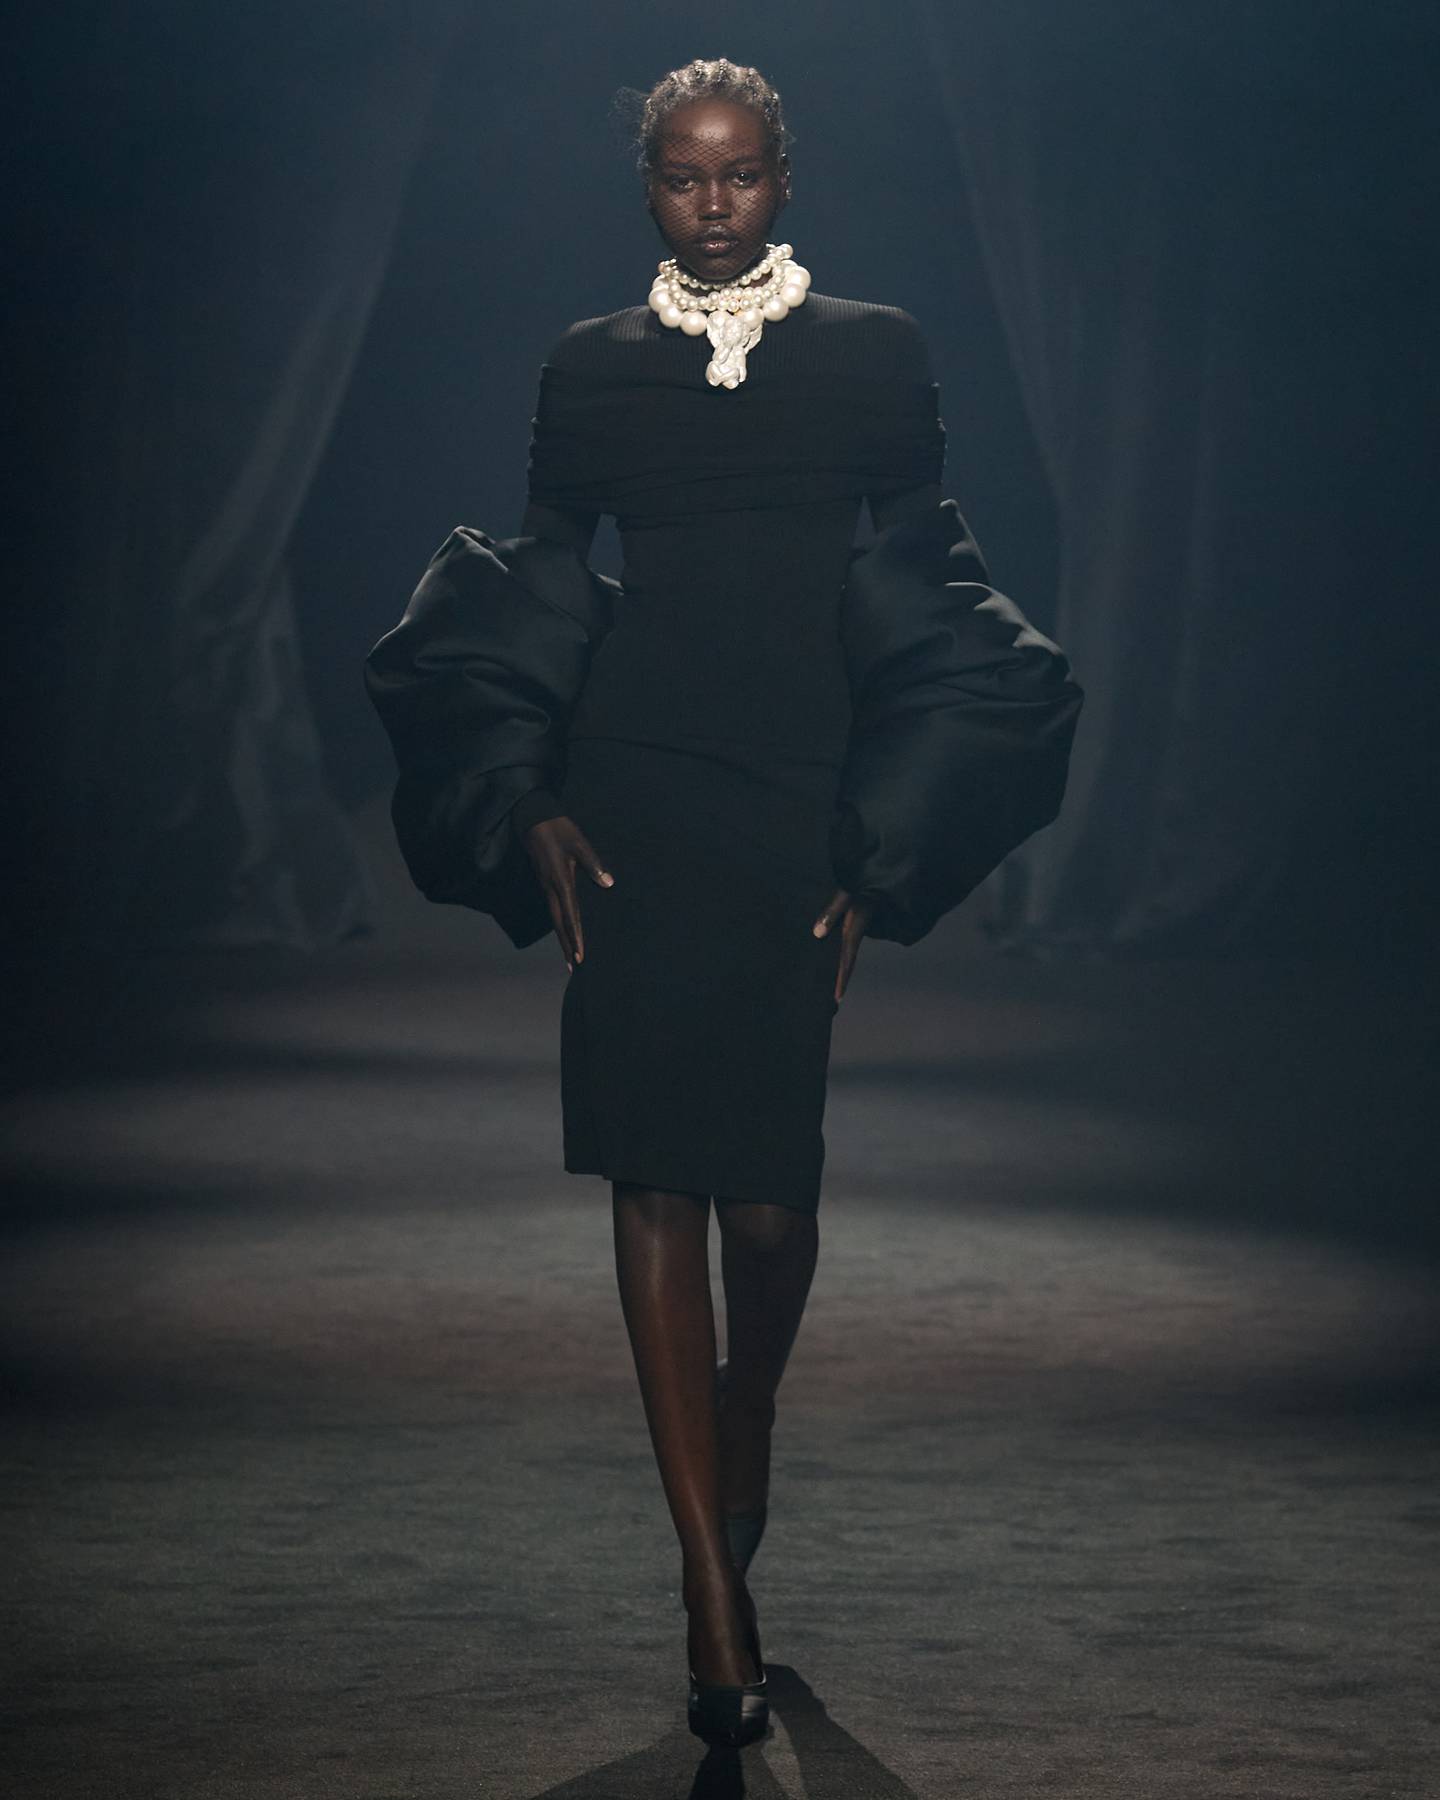 A model walks the runway during the Alber Elbaz tribute show as part of Paris Fashion Week. Courtesy.